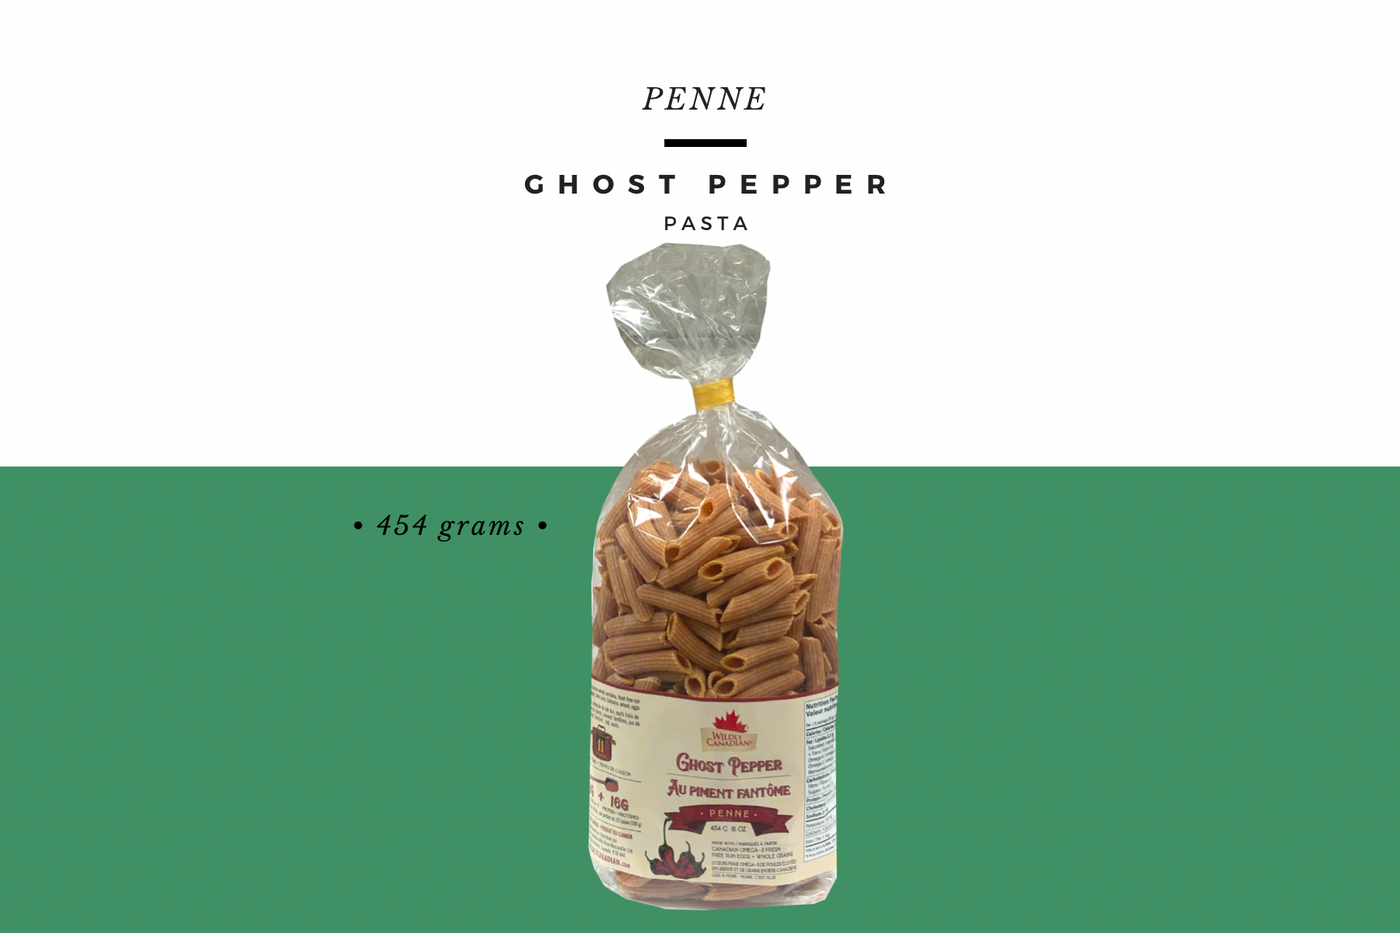 Wildly Canadian Ghost Pepper Penne